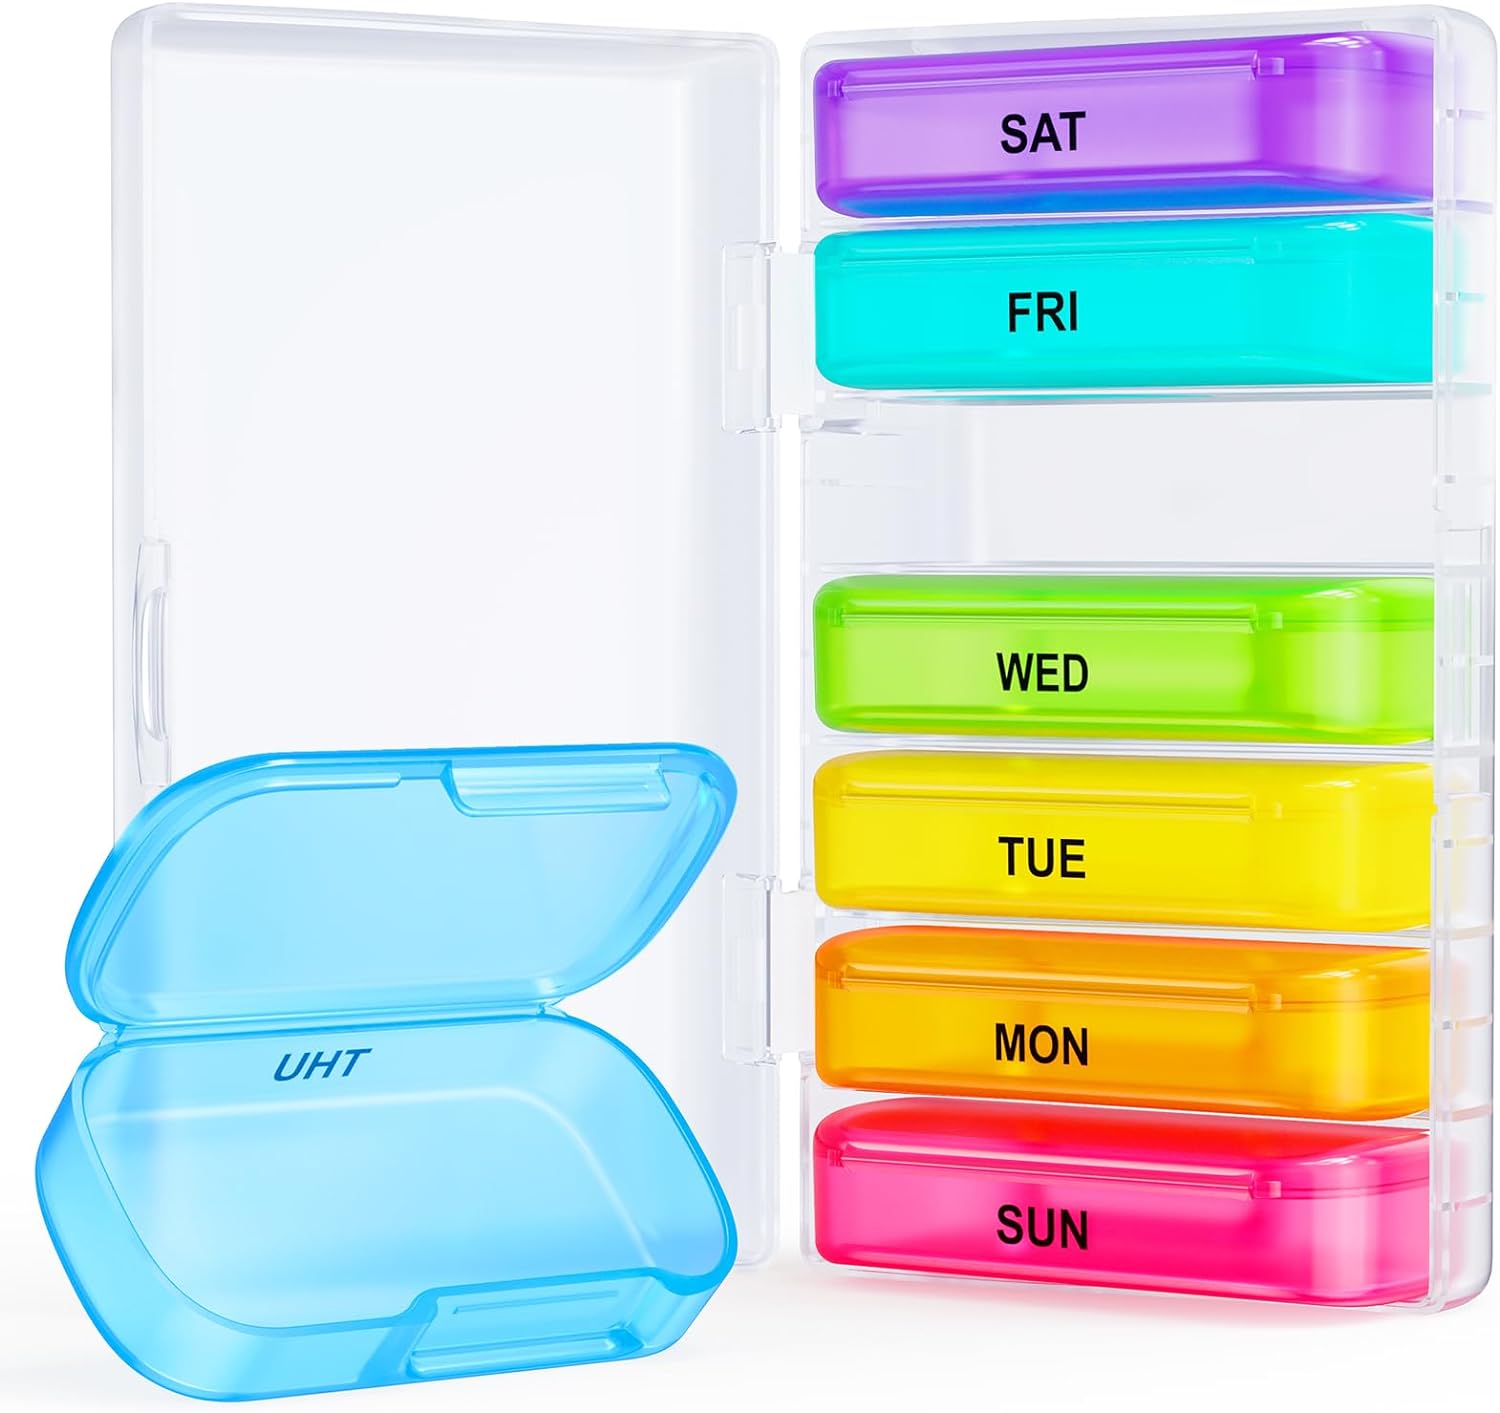 I take several pills, prescription and vitamins every day. I tried other pill organizers but they were too small for everything. This one is perfect and easy to set up. Also convenient for travel.